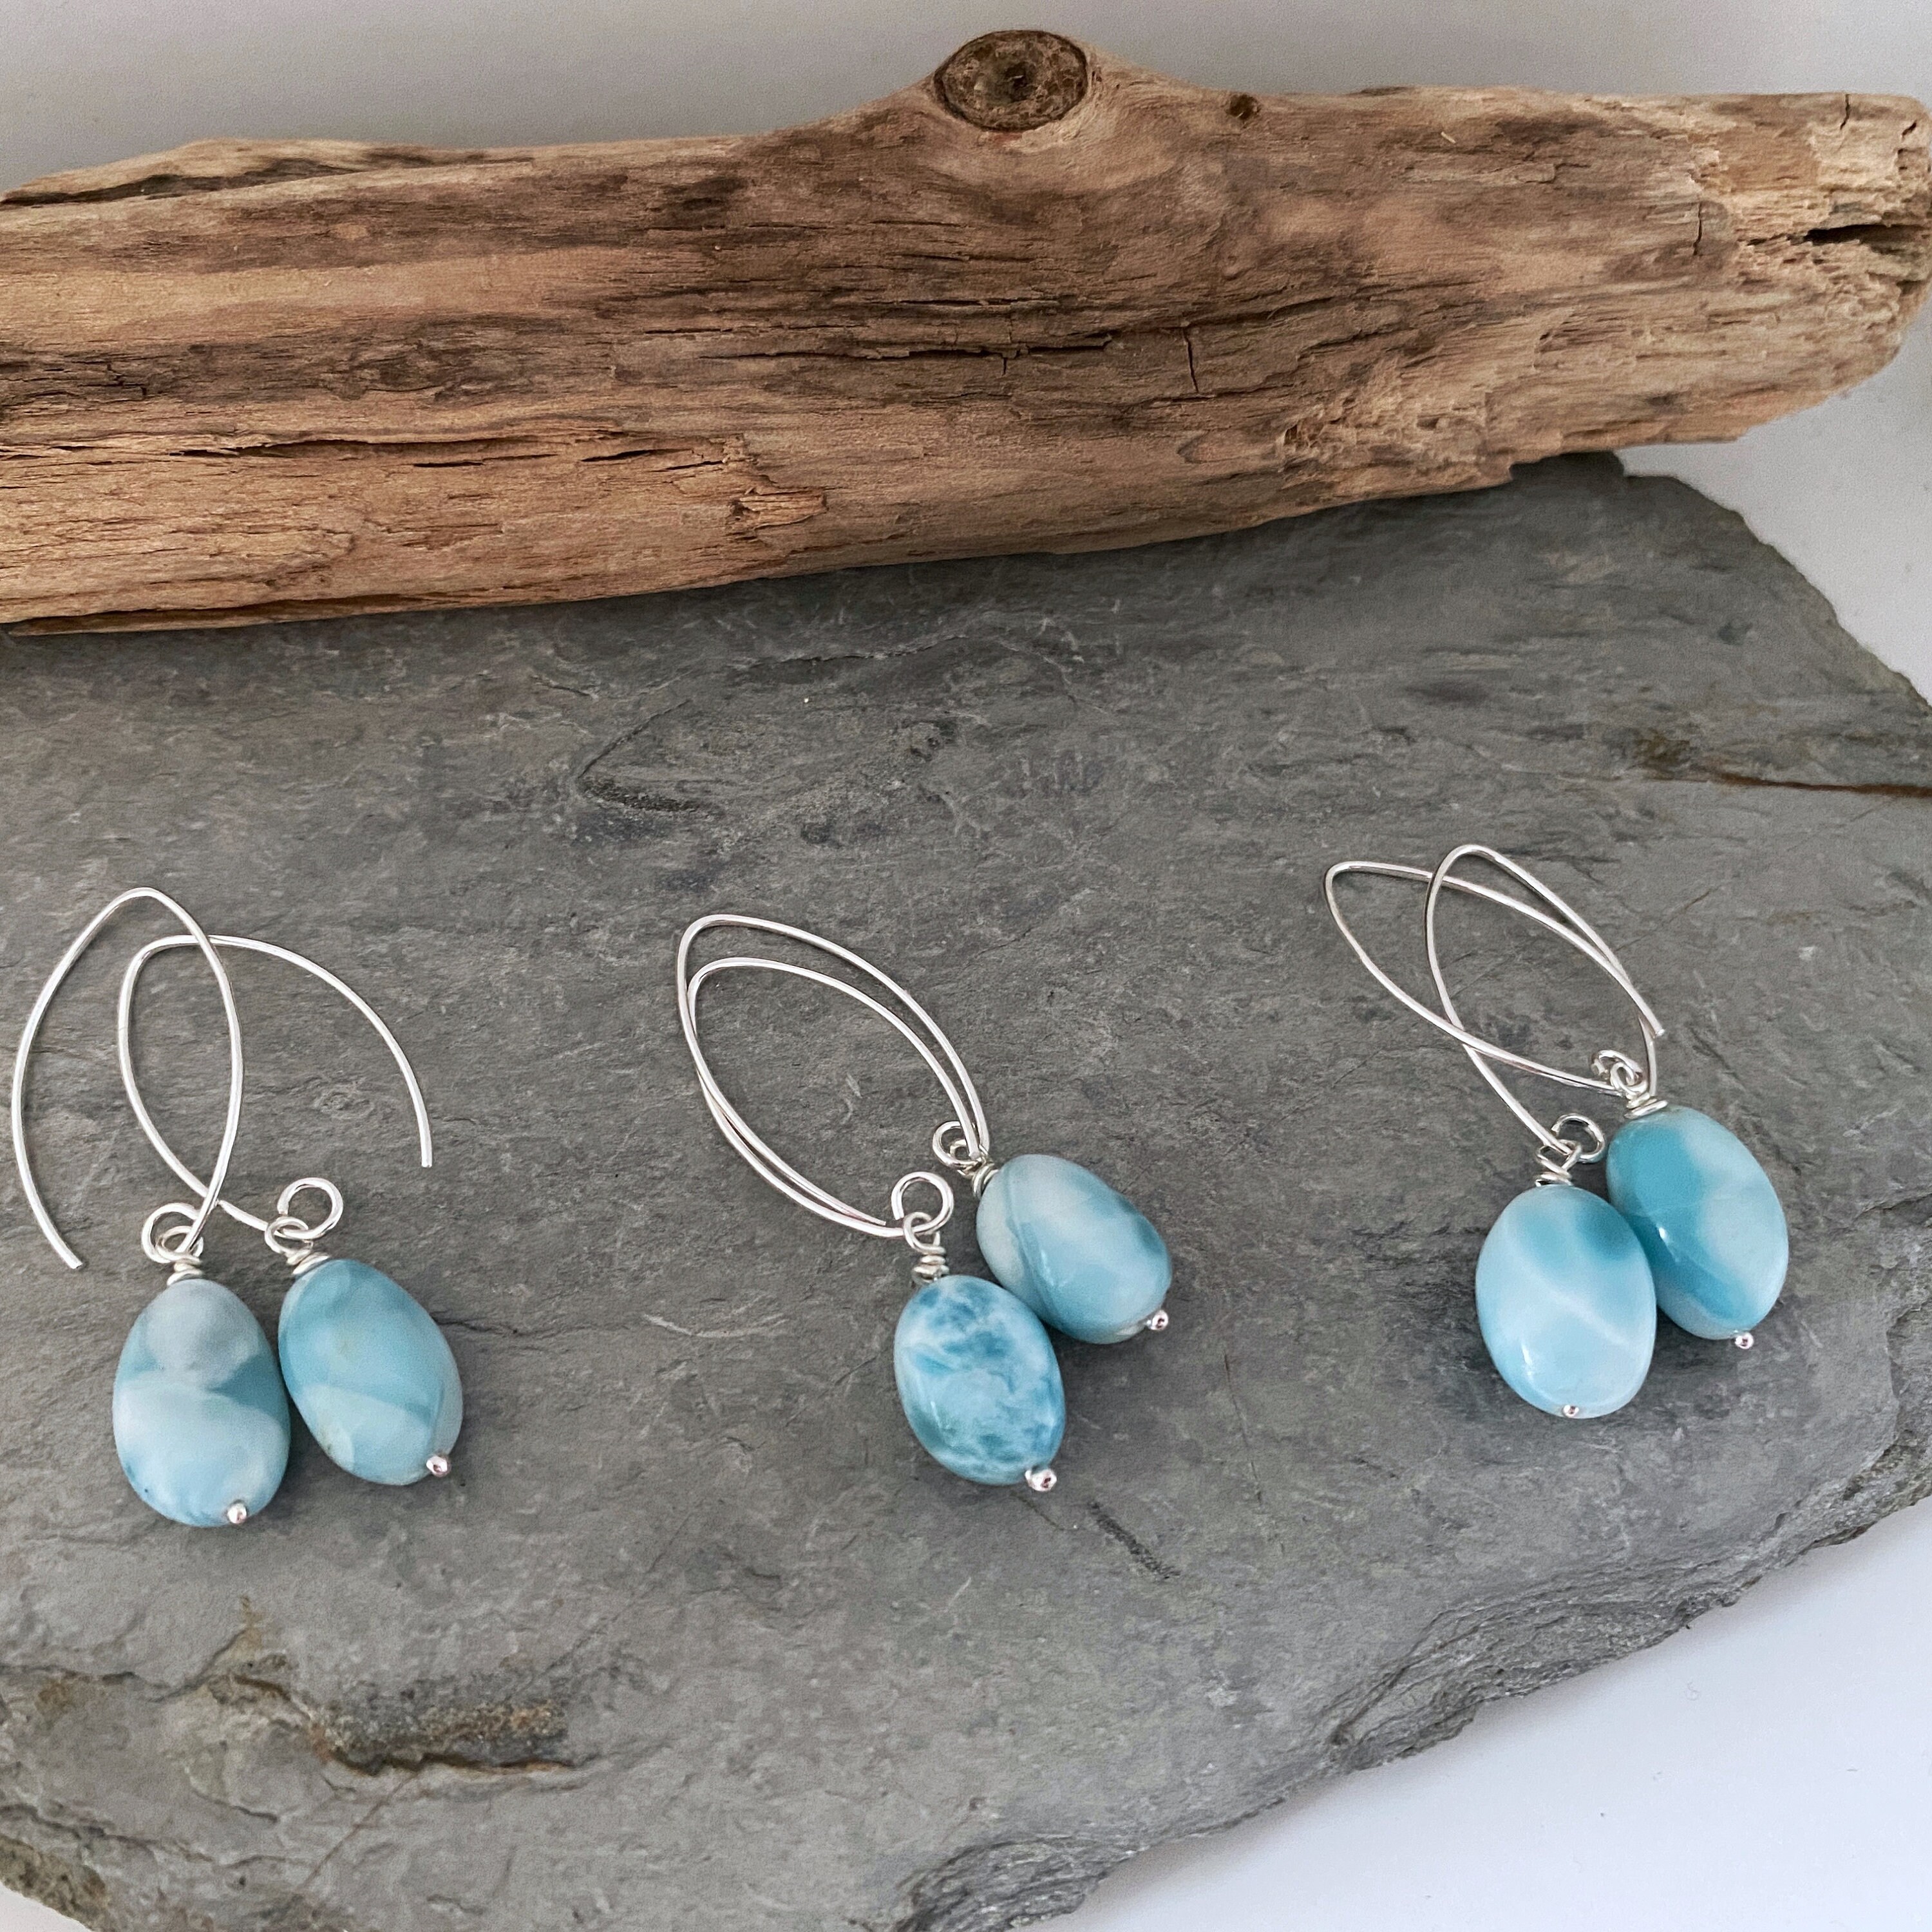 Long Dangly Earrings With Turquoise Larimar Gemstone Drops, Coloured Earrings